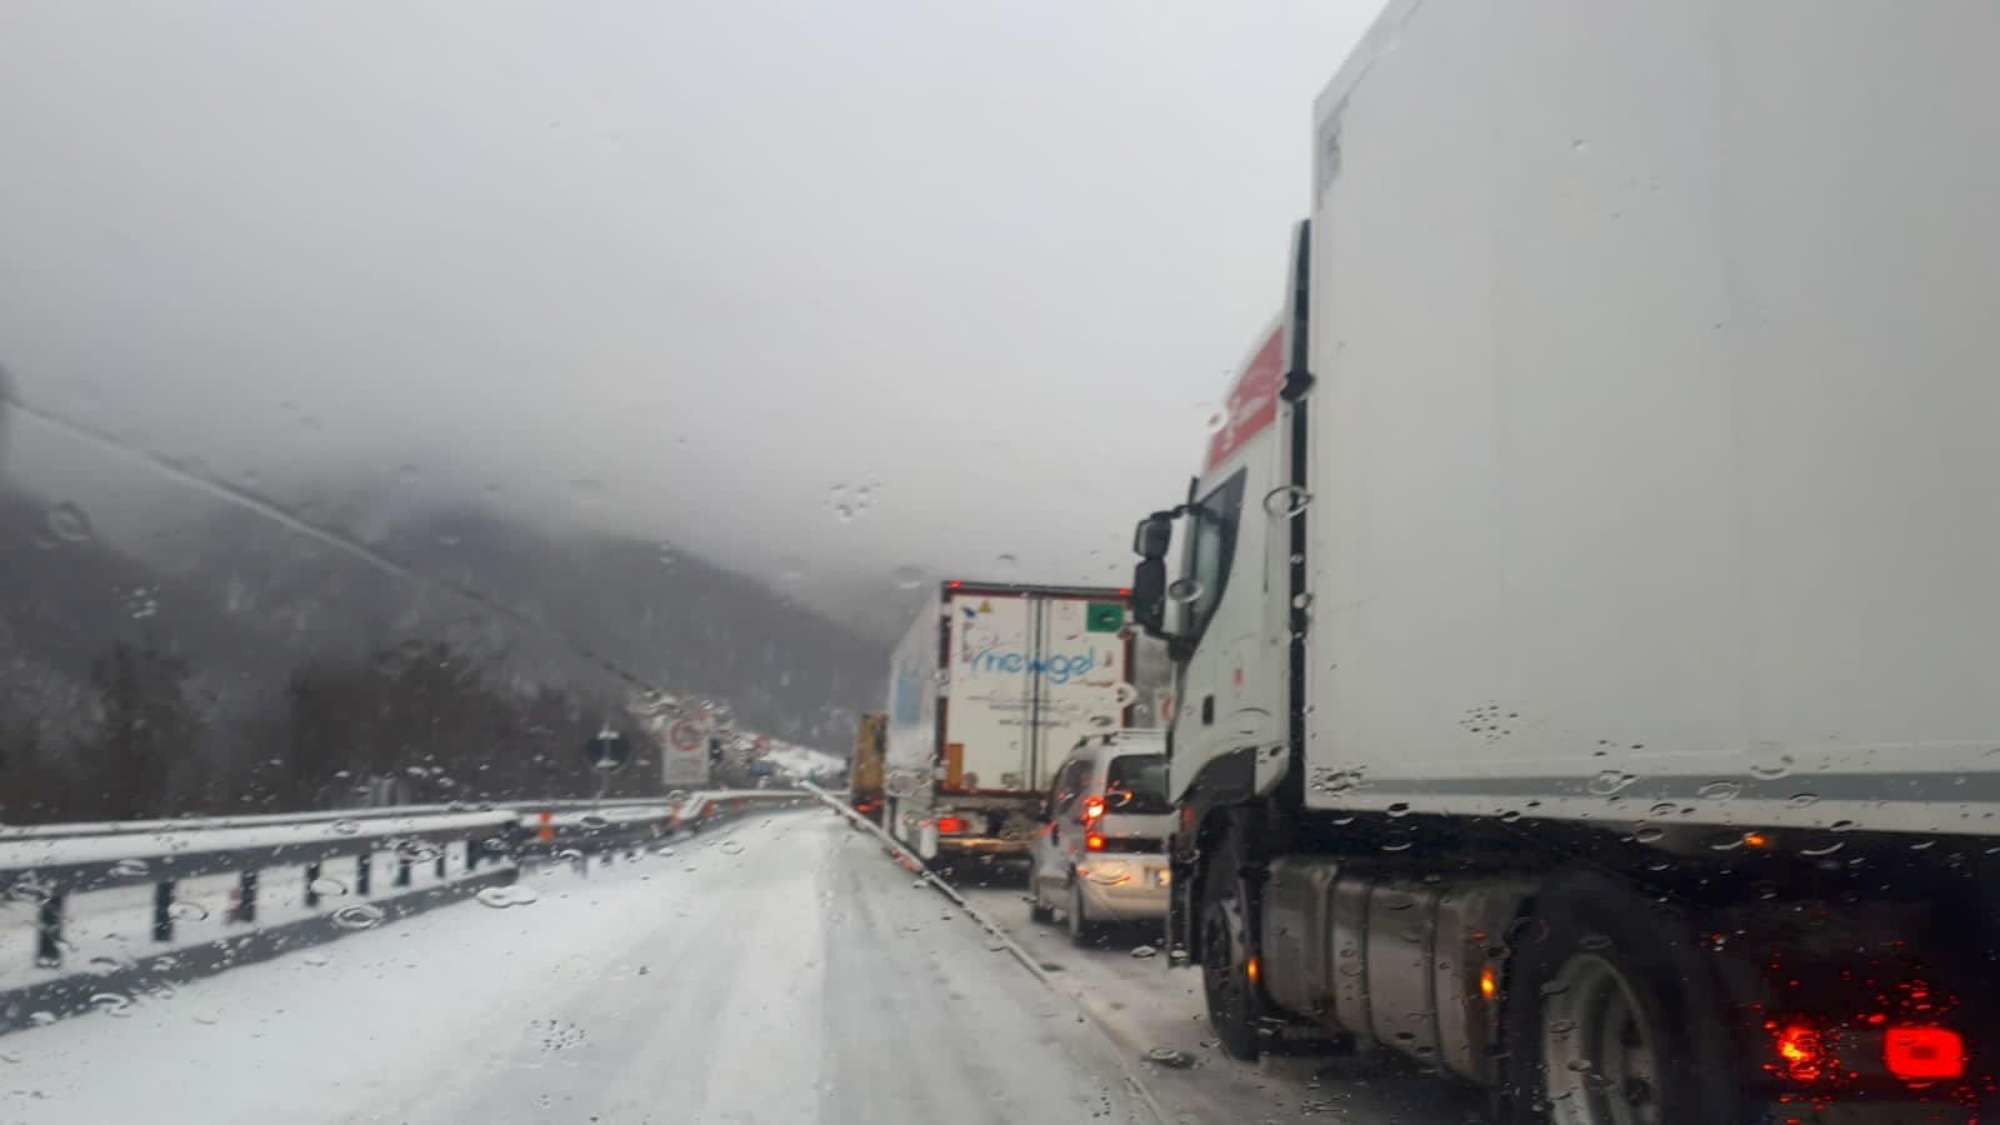 camion sulla neve 001